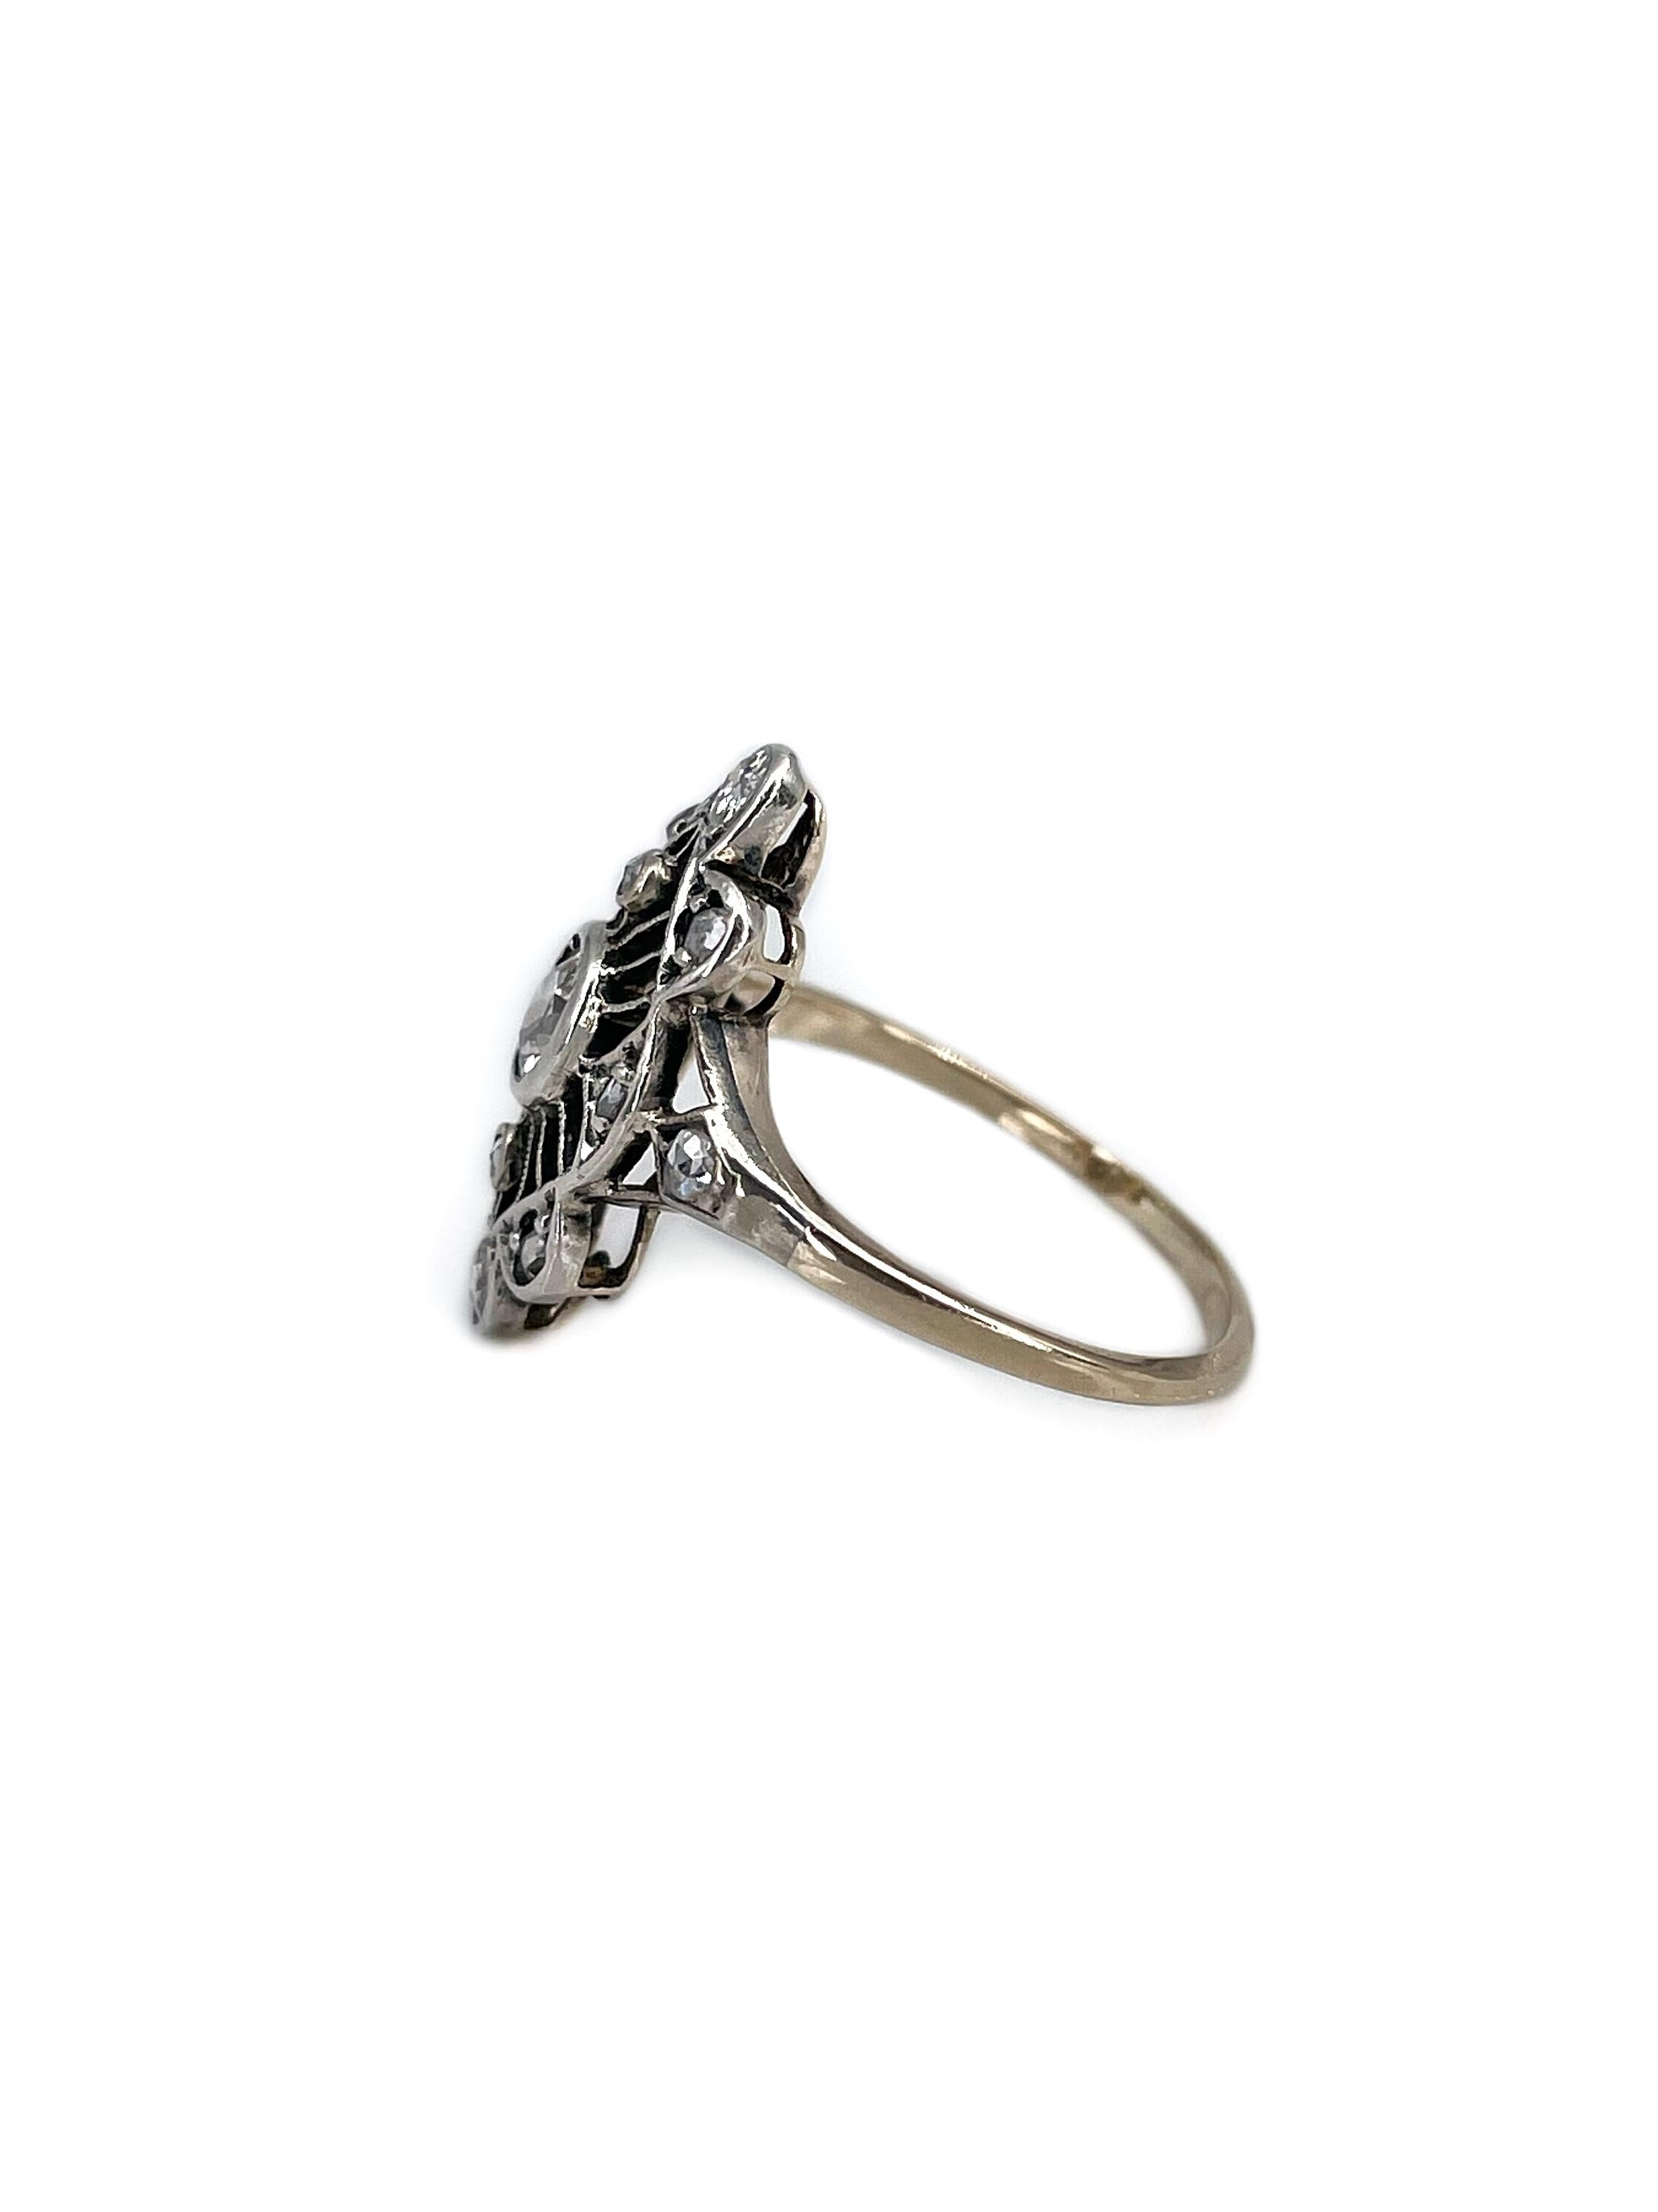 This is an elegant Art Deco navette ring crafted in 14K gold (56% pure gold in alloy) and adorned with silver. The piece features 3 Old European cut and 10 rose cut diamonds. Diamonds total weight 0.405ct, colour RW-W, clarity VS-SI.

It is a